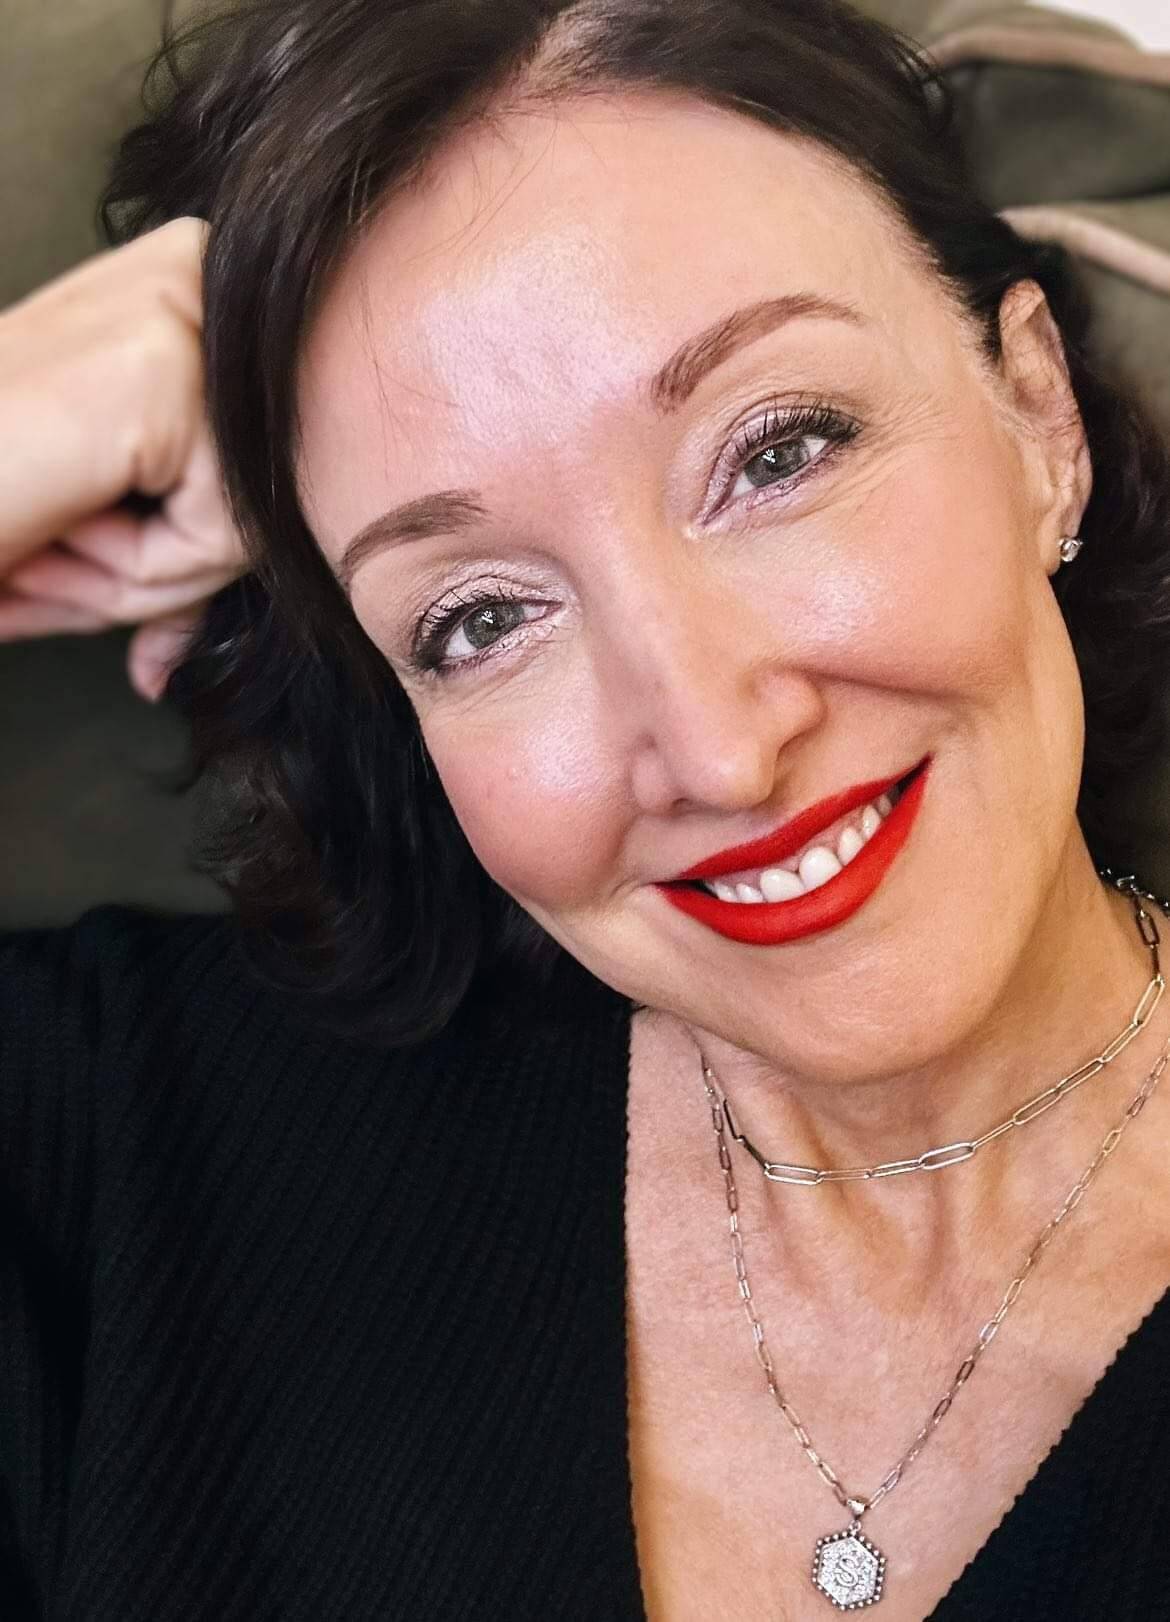 Suzan Hall, an over 50 GenX enthusiast, with short black hair, a slender build, and impeccable makeup, including striking red lipstick. She's proudly sporting a GenX t-shirt, radiating confidence and style.